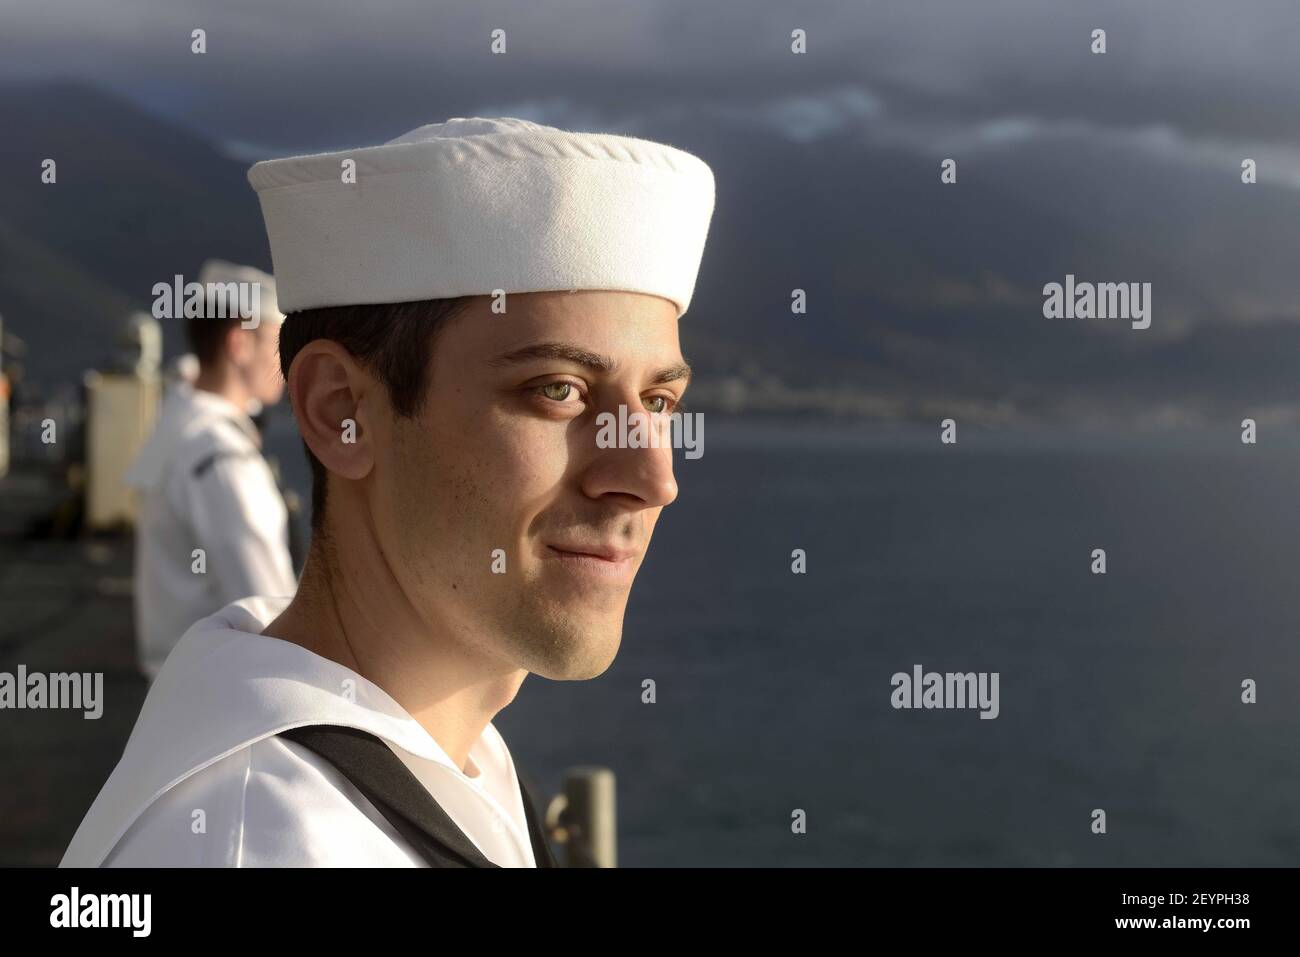 GAETA, Italy (Oct. 3, 2015) Information Systems Technician 3rd Class Michael Tontz mans the rails as the U.S. 6th Fleet command and control ship USS Mount Whitney (LCC 20) pulls into Gaeta, Italy after a nine month dry-dock period in Rijeka, Croatia. Mount Whitney, forward deployed to Gaeta, Italy, operates with a combined crew of U.S. Navy Sailors and Military Sealift Command civil service mariners. (Photo by Mass Communication Specialist 1st Class Mike Wright/U.S. Navy) 151003-N-VY489-096 *** Please Use Credit from Credit Field *** Stock Photo